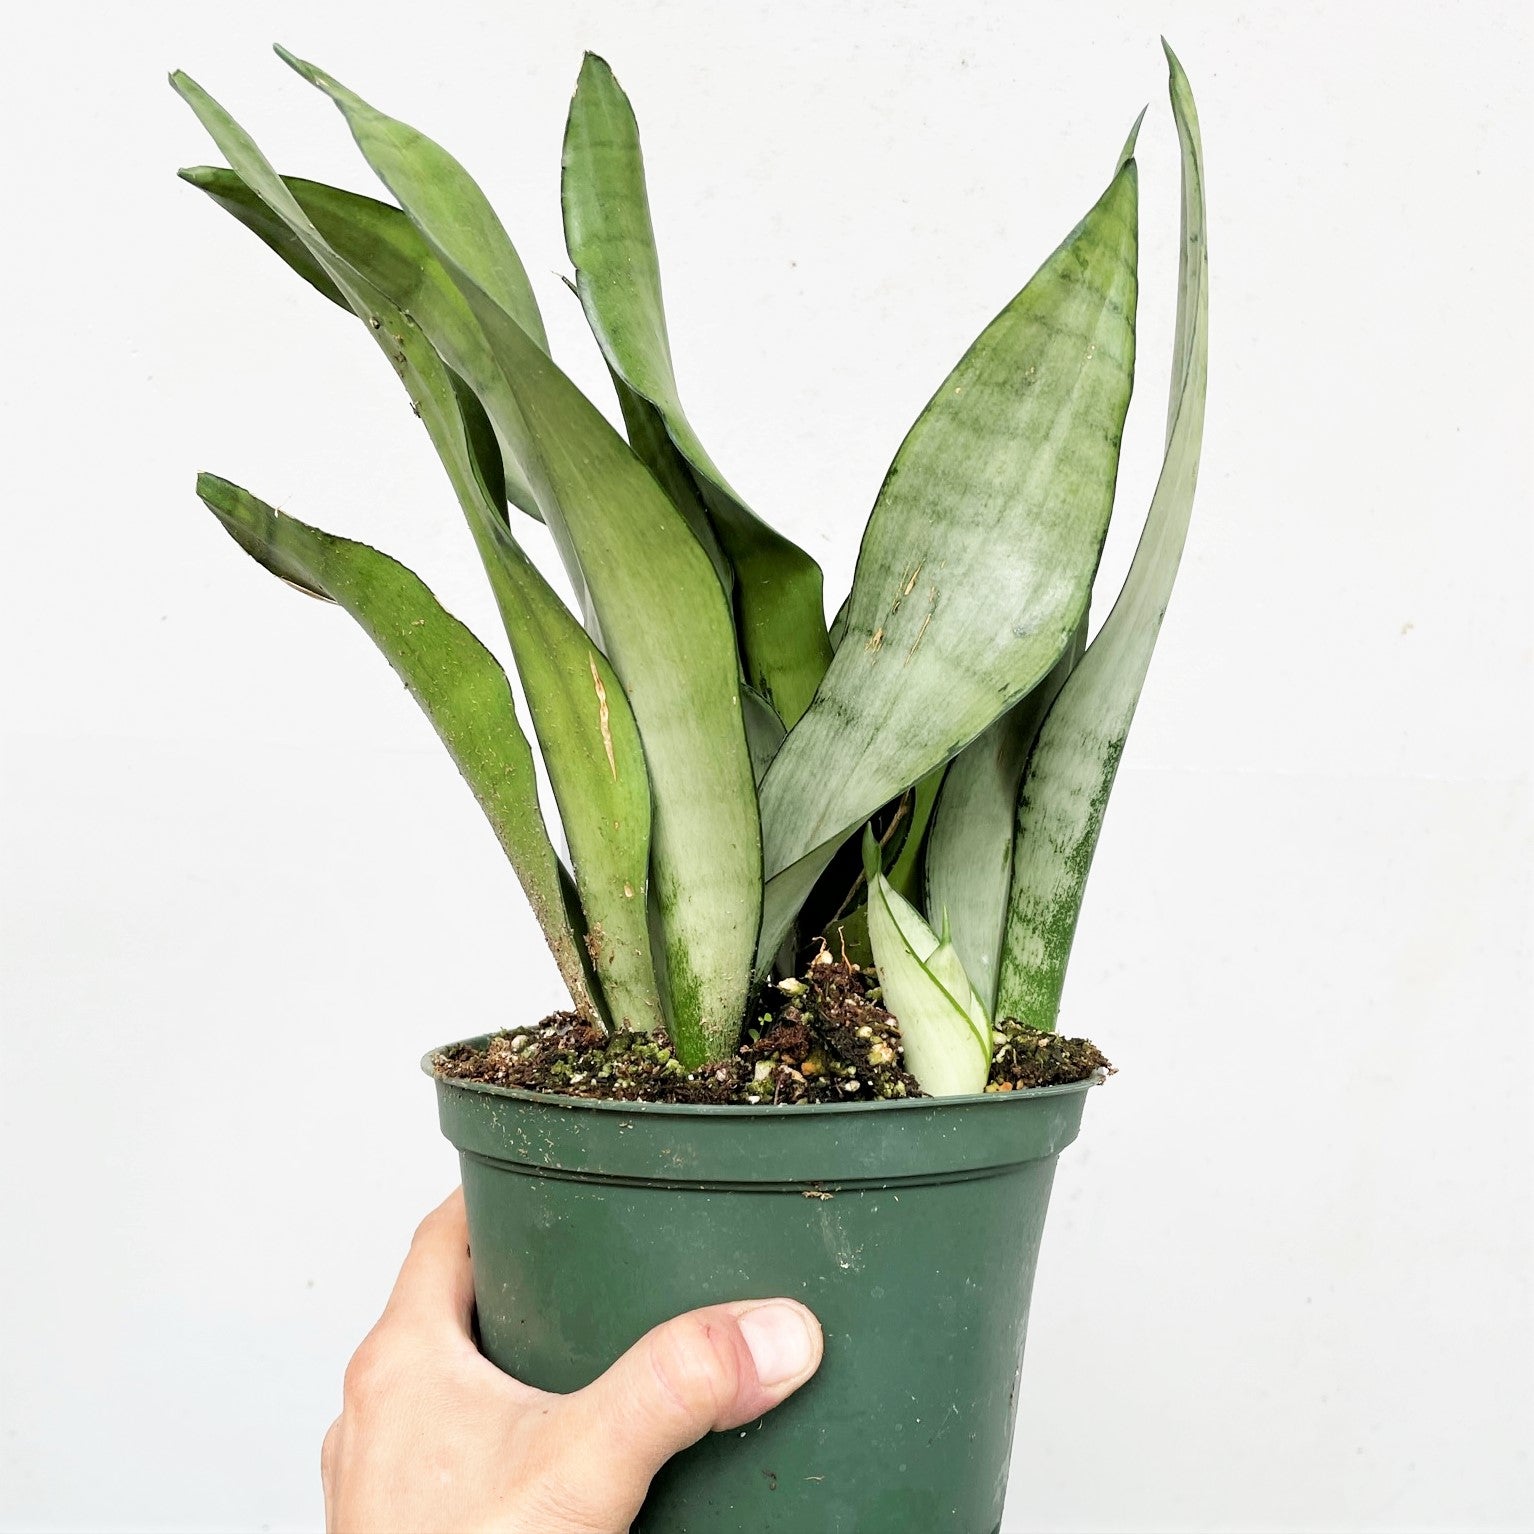 Sansevieria trifasciata 'Moonshine' - Snake Plant, Mother-in-Law's Tongue